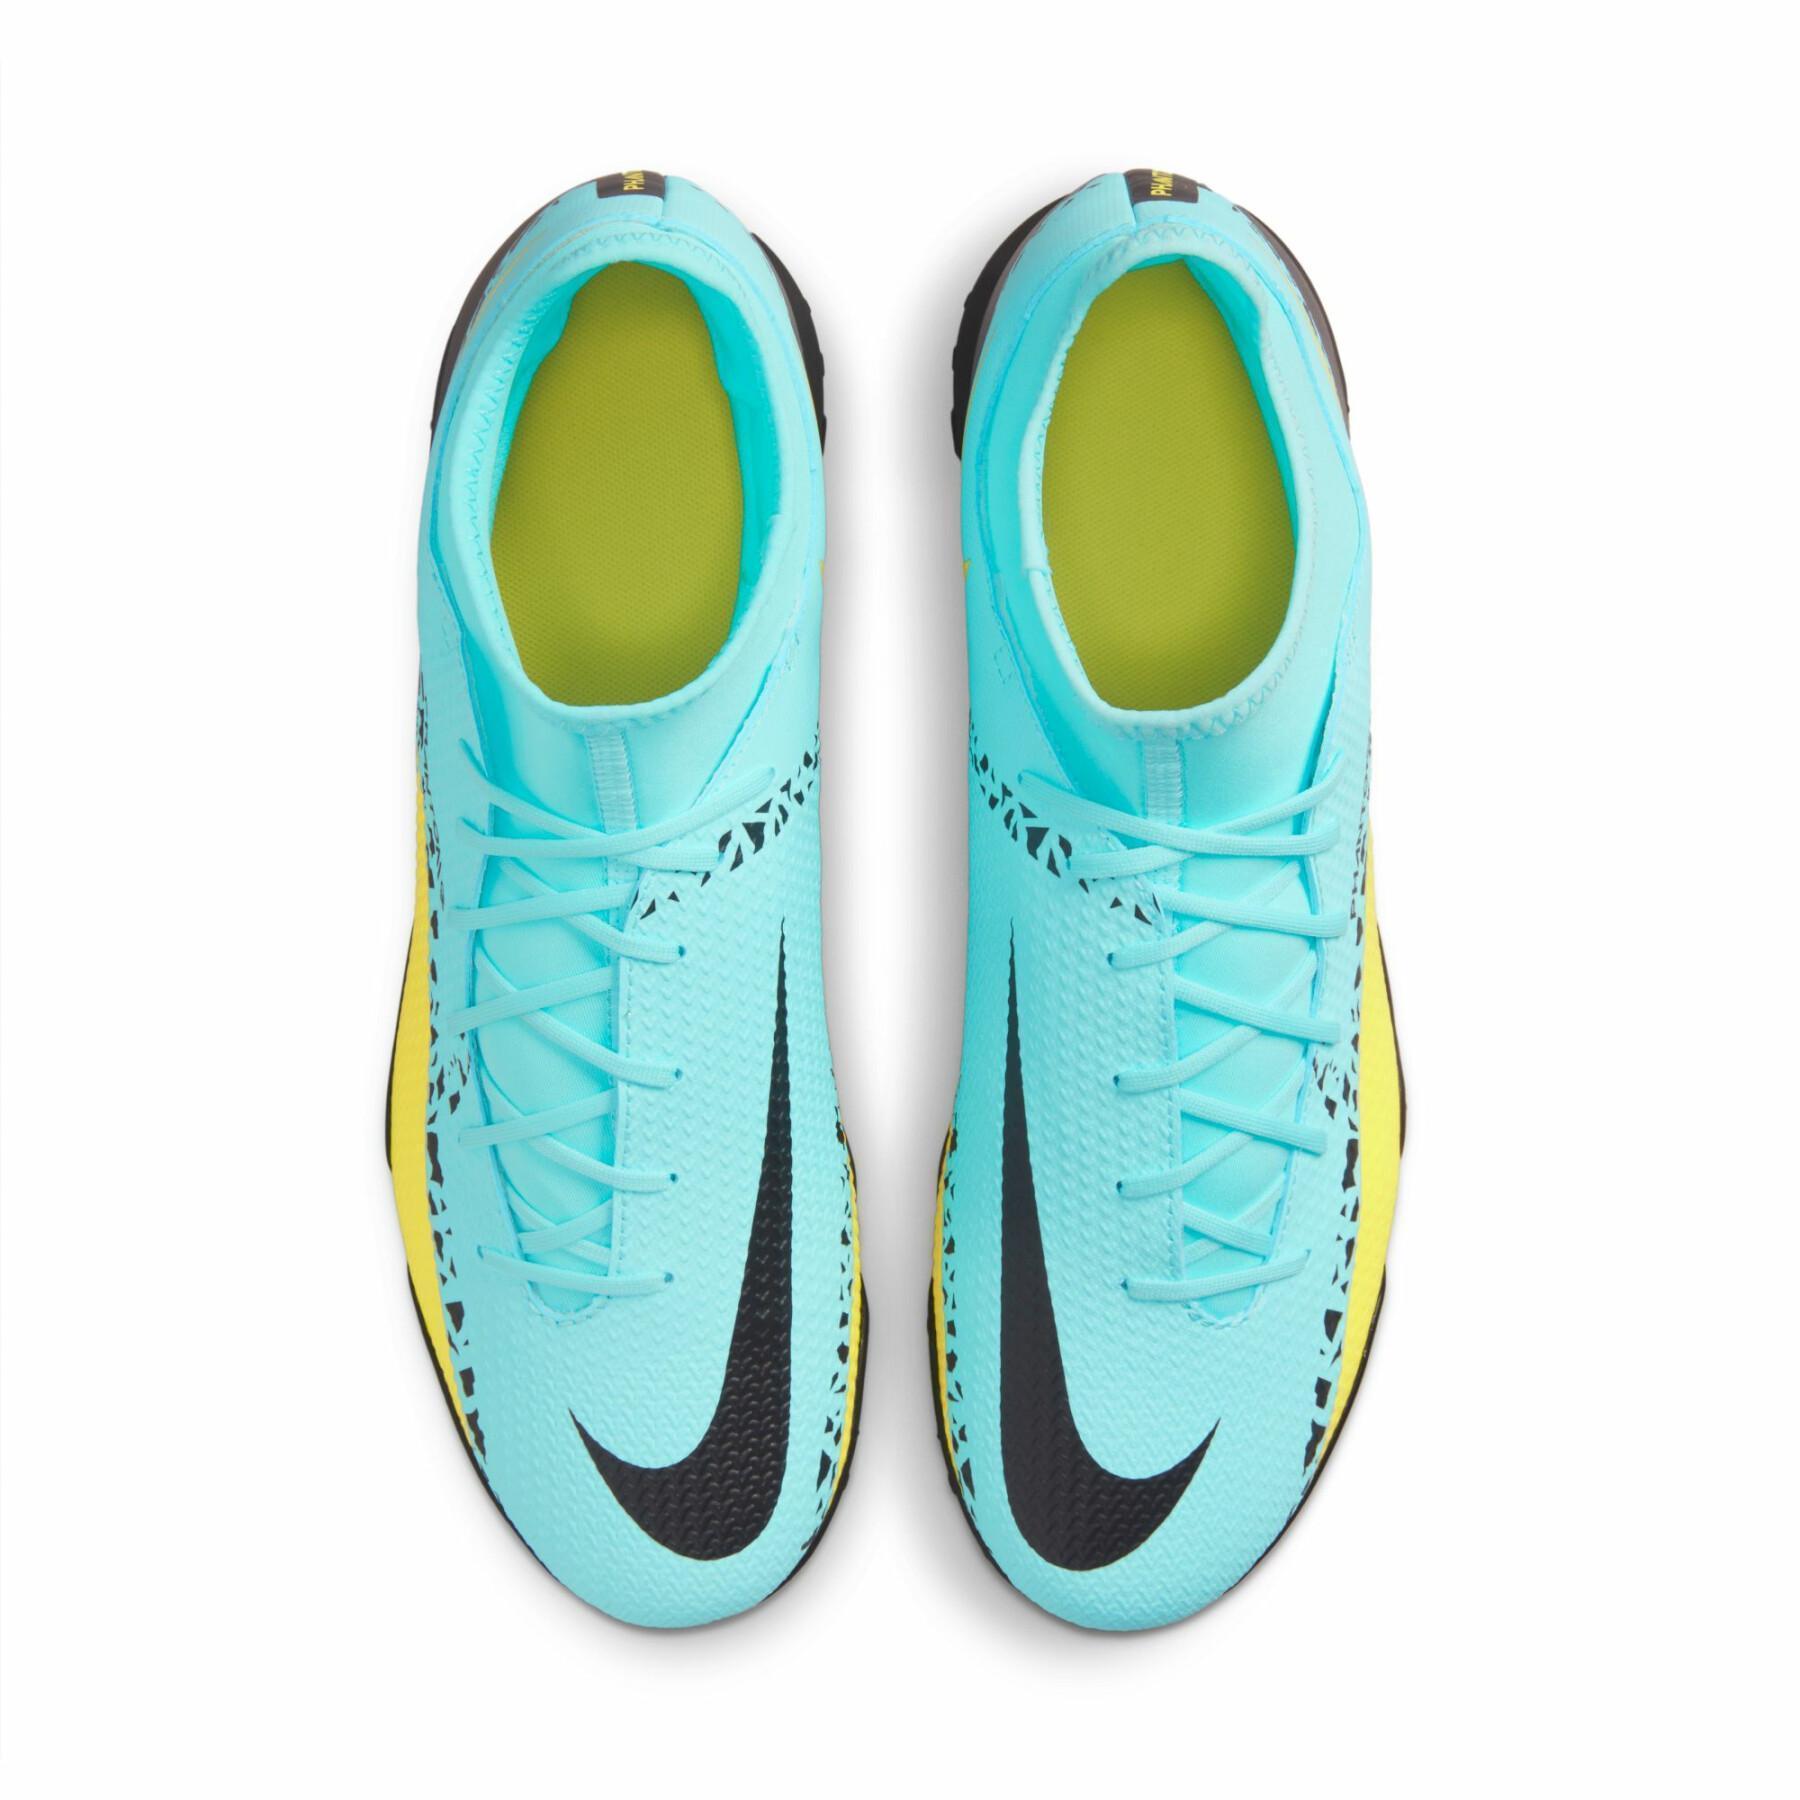 Voetbalschoenen Nike Phantom GT2 Club Dynamic Fit TF - Lucent Pack